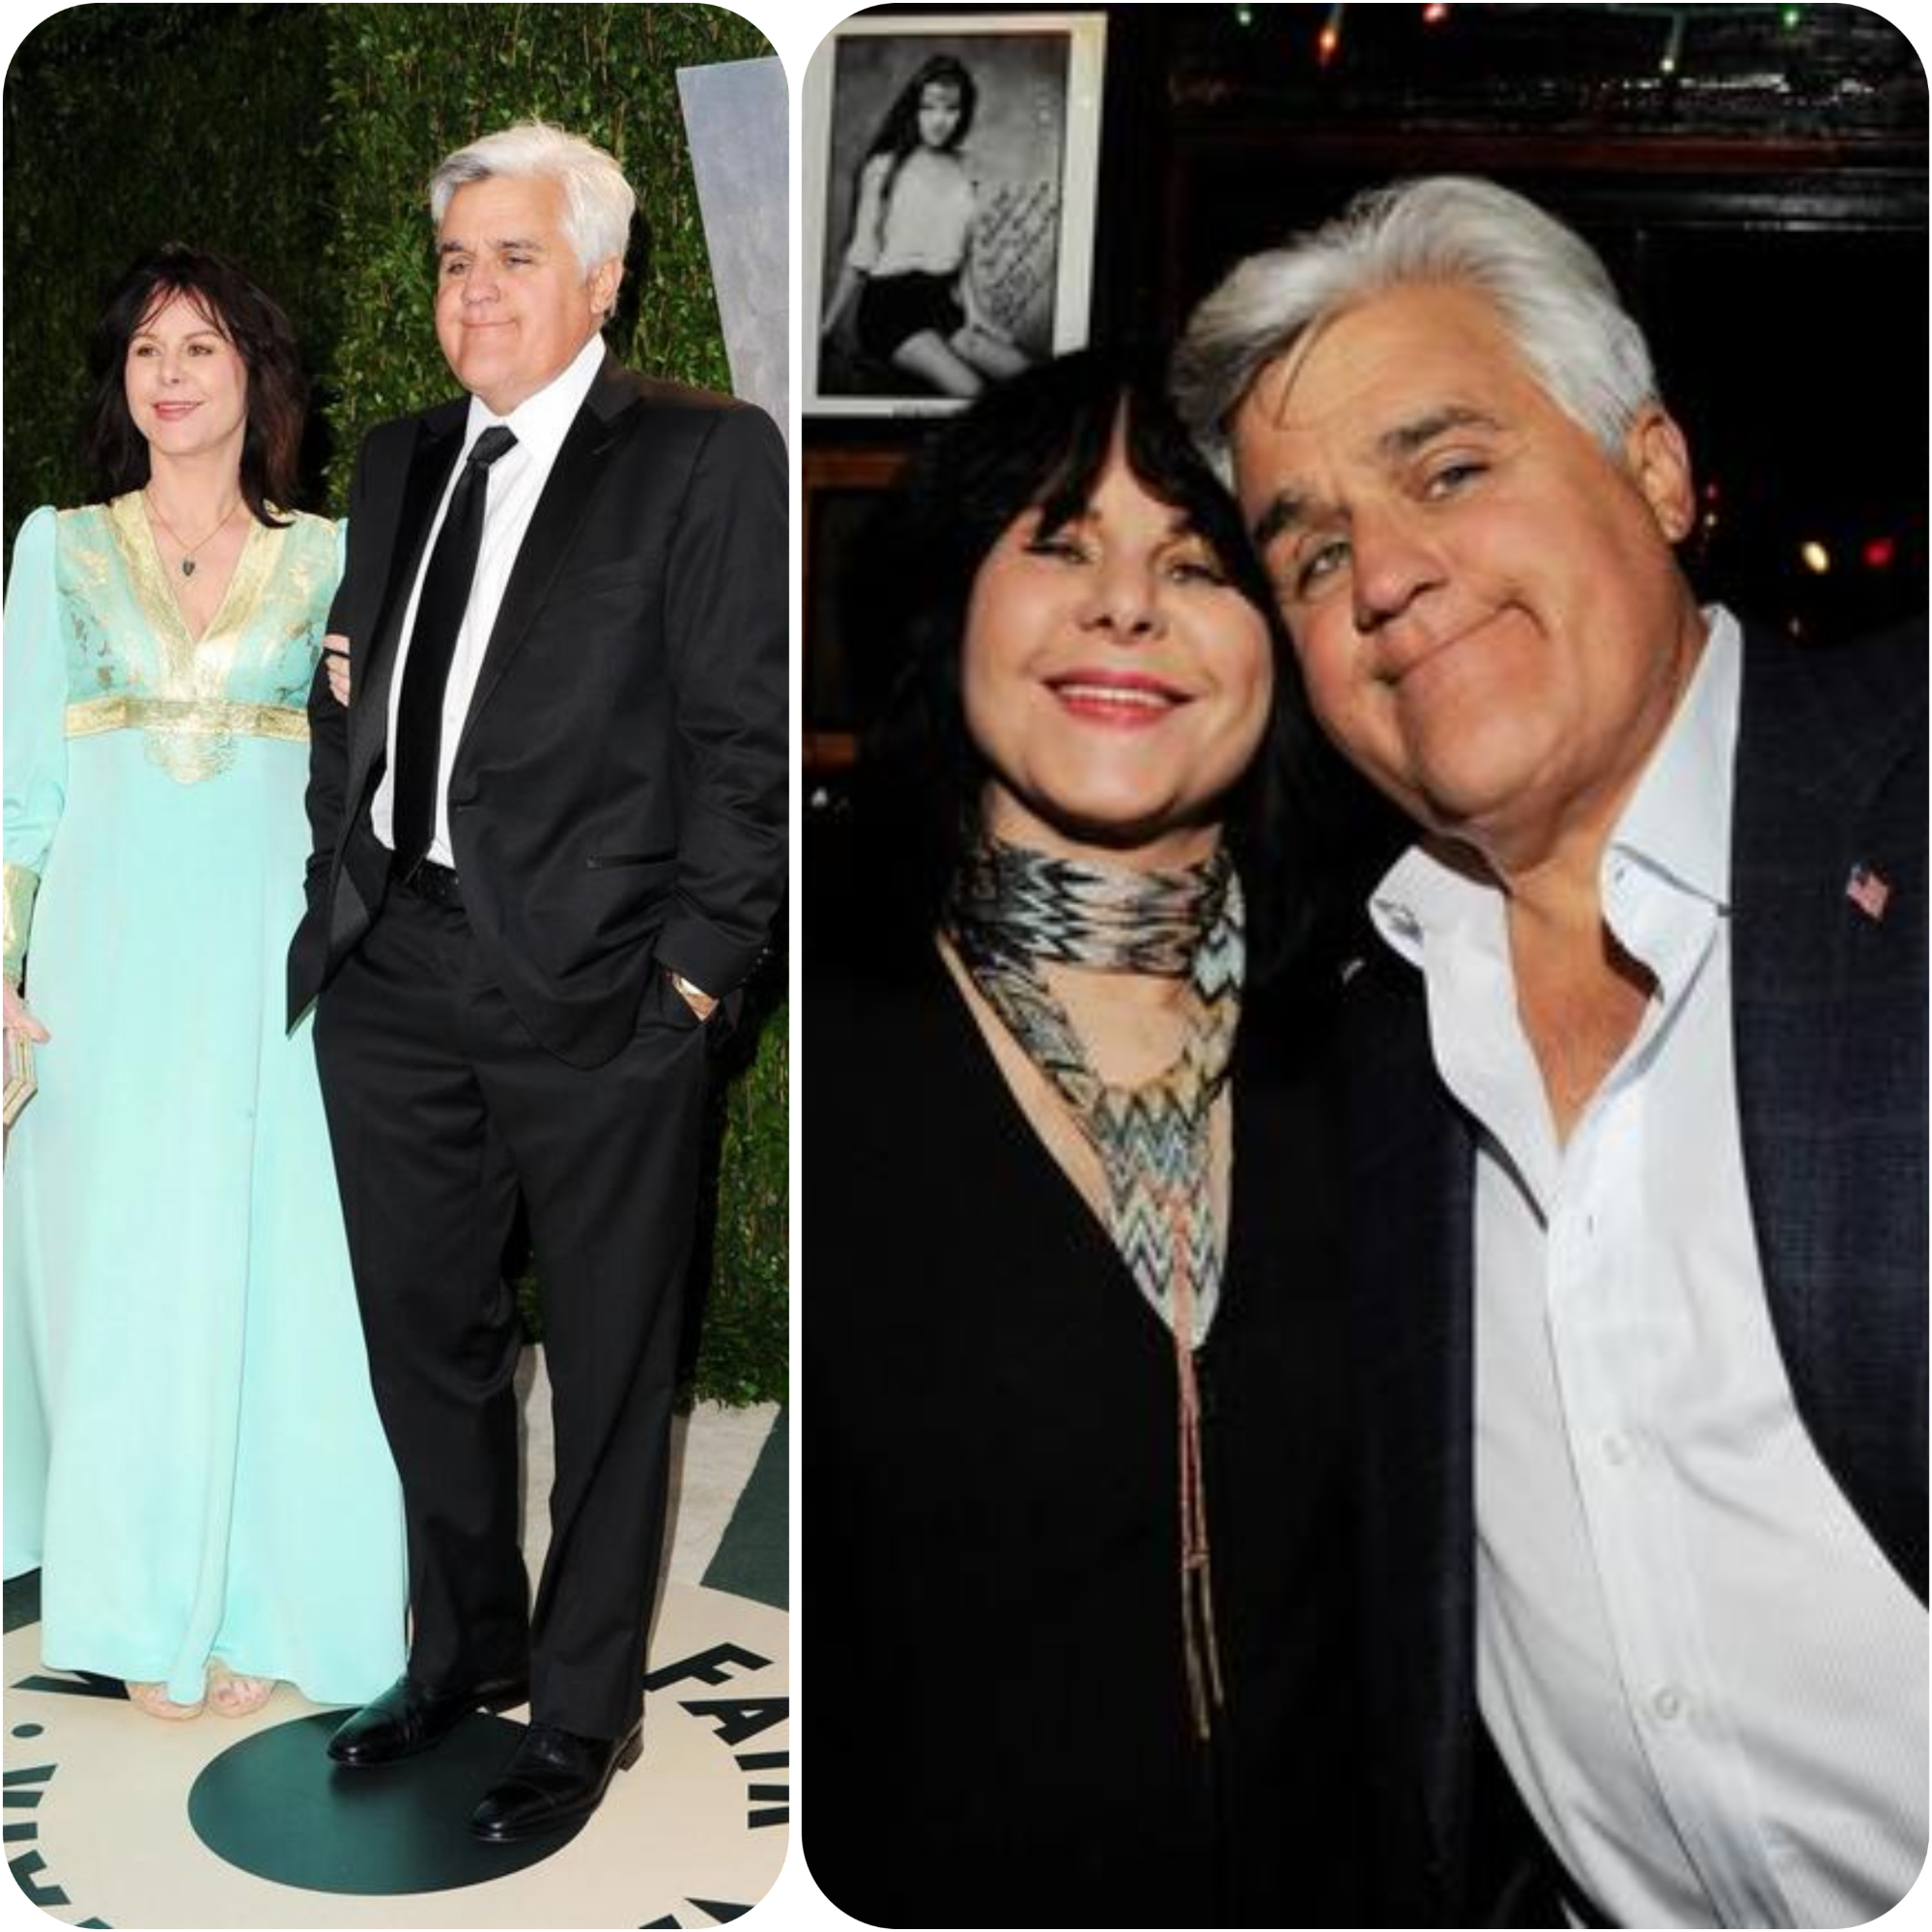 Jay Leno has taken a step that thrusts him and his wife, Mavis